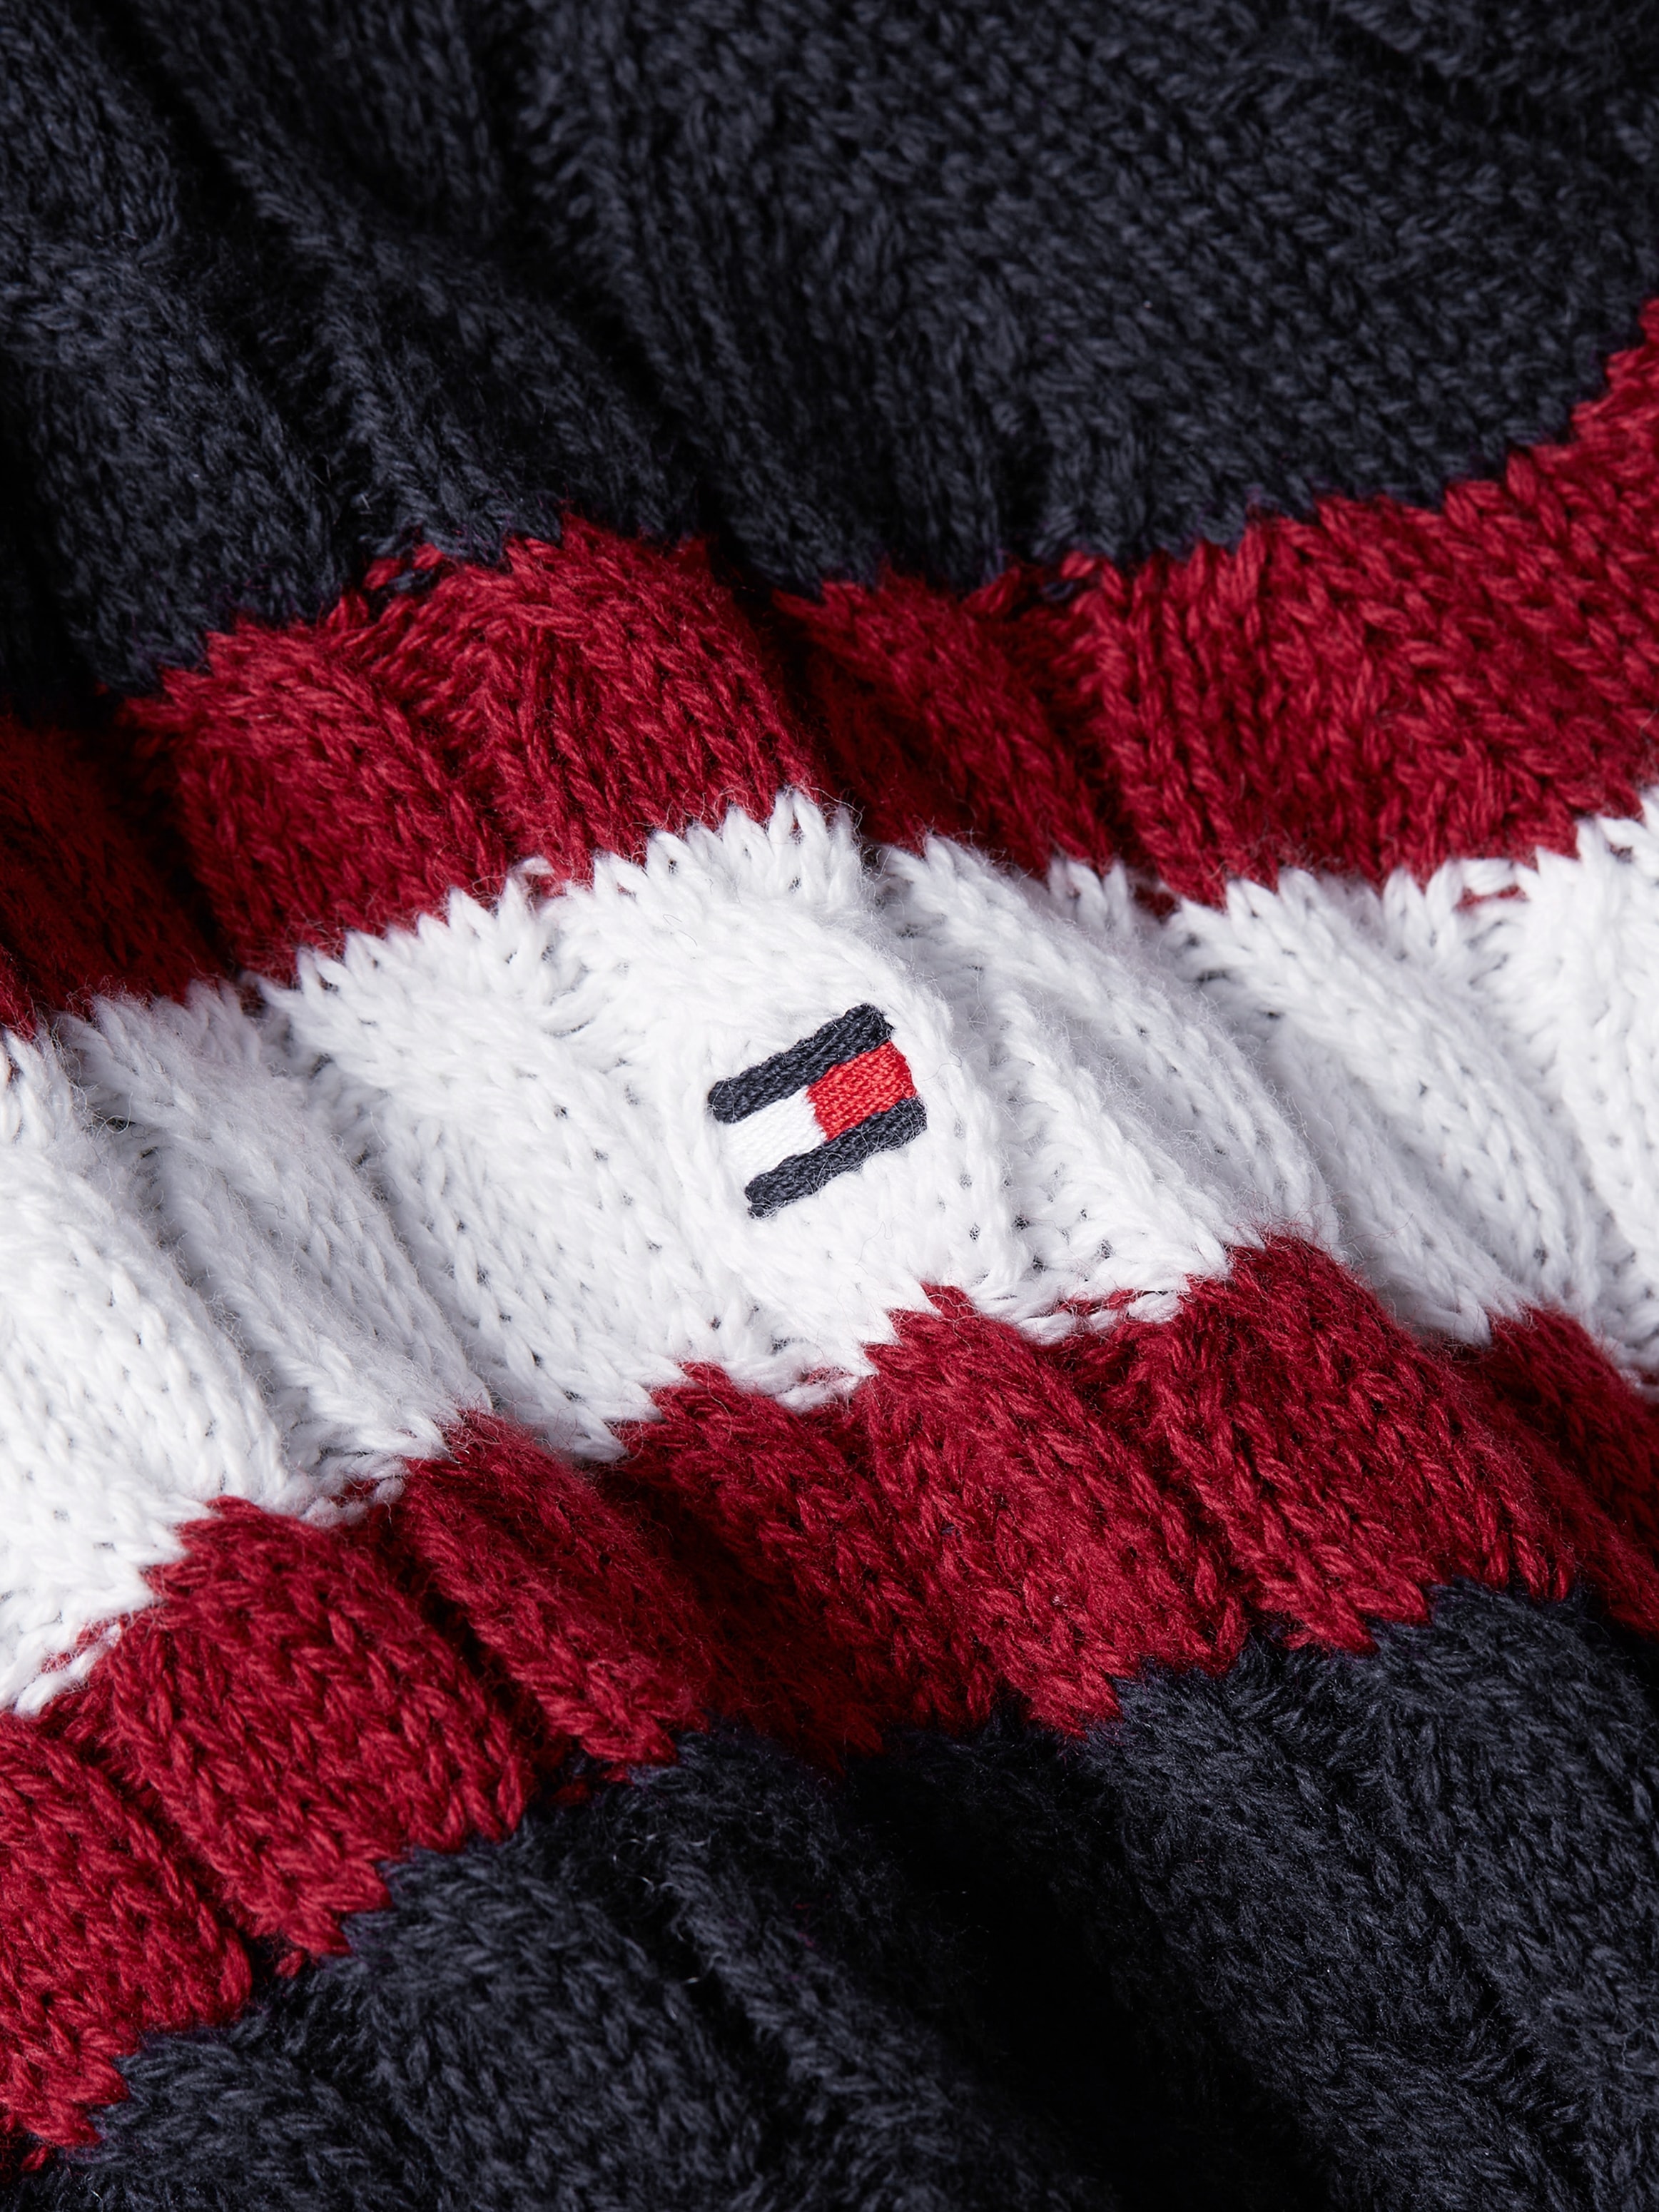 Tommy Hilfiger Strickpullover »CO CABLE bei Logostickerei C-NECK mit MINI SWEATER«, ♕